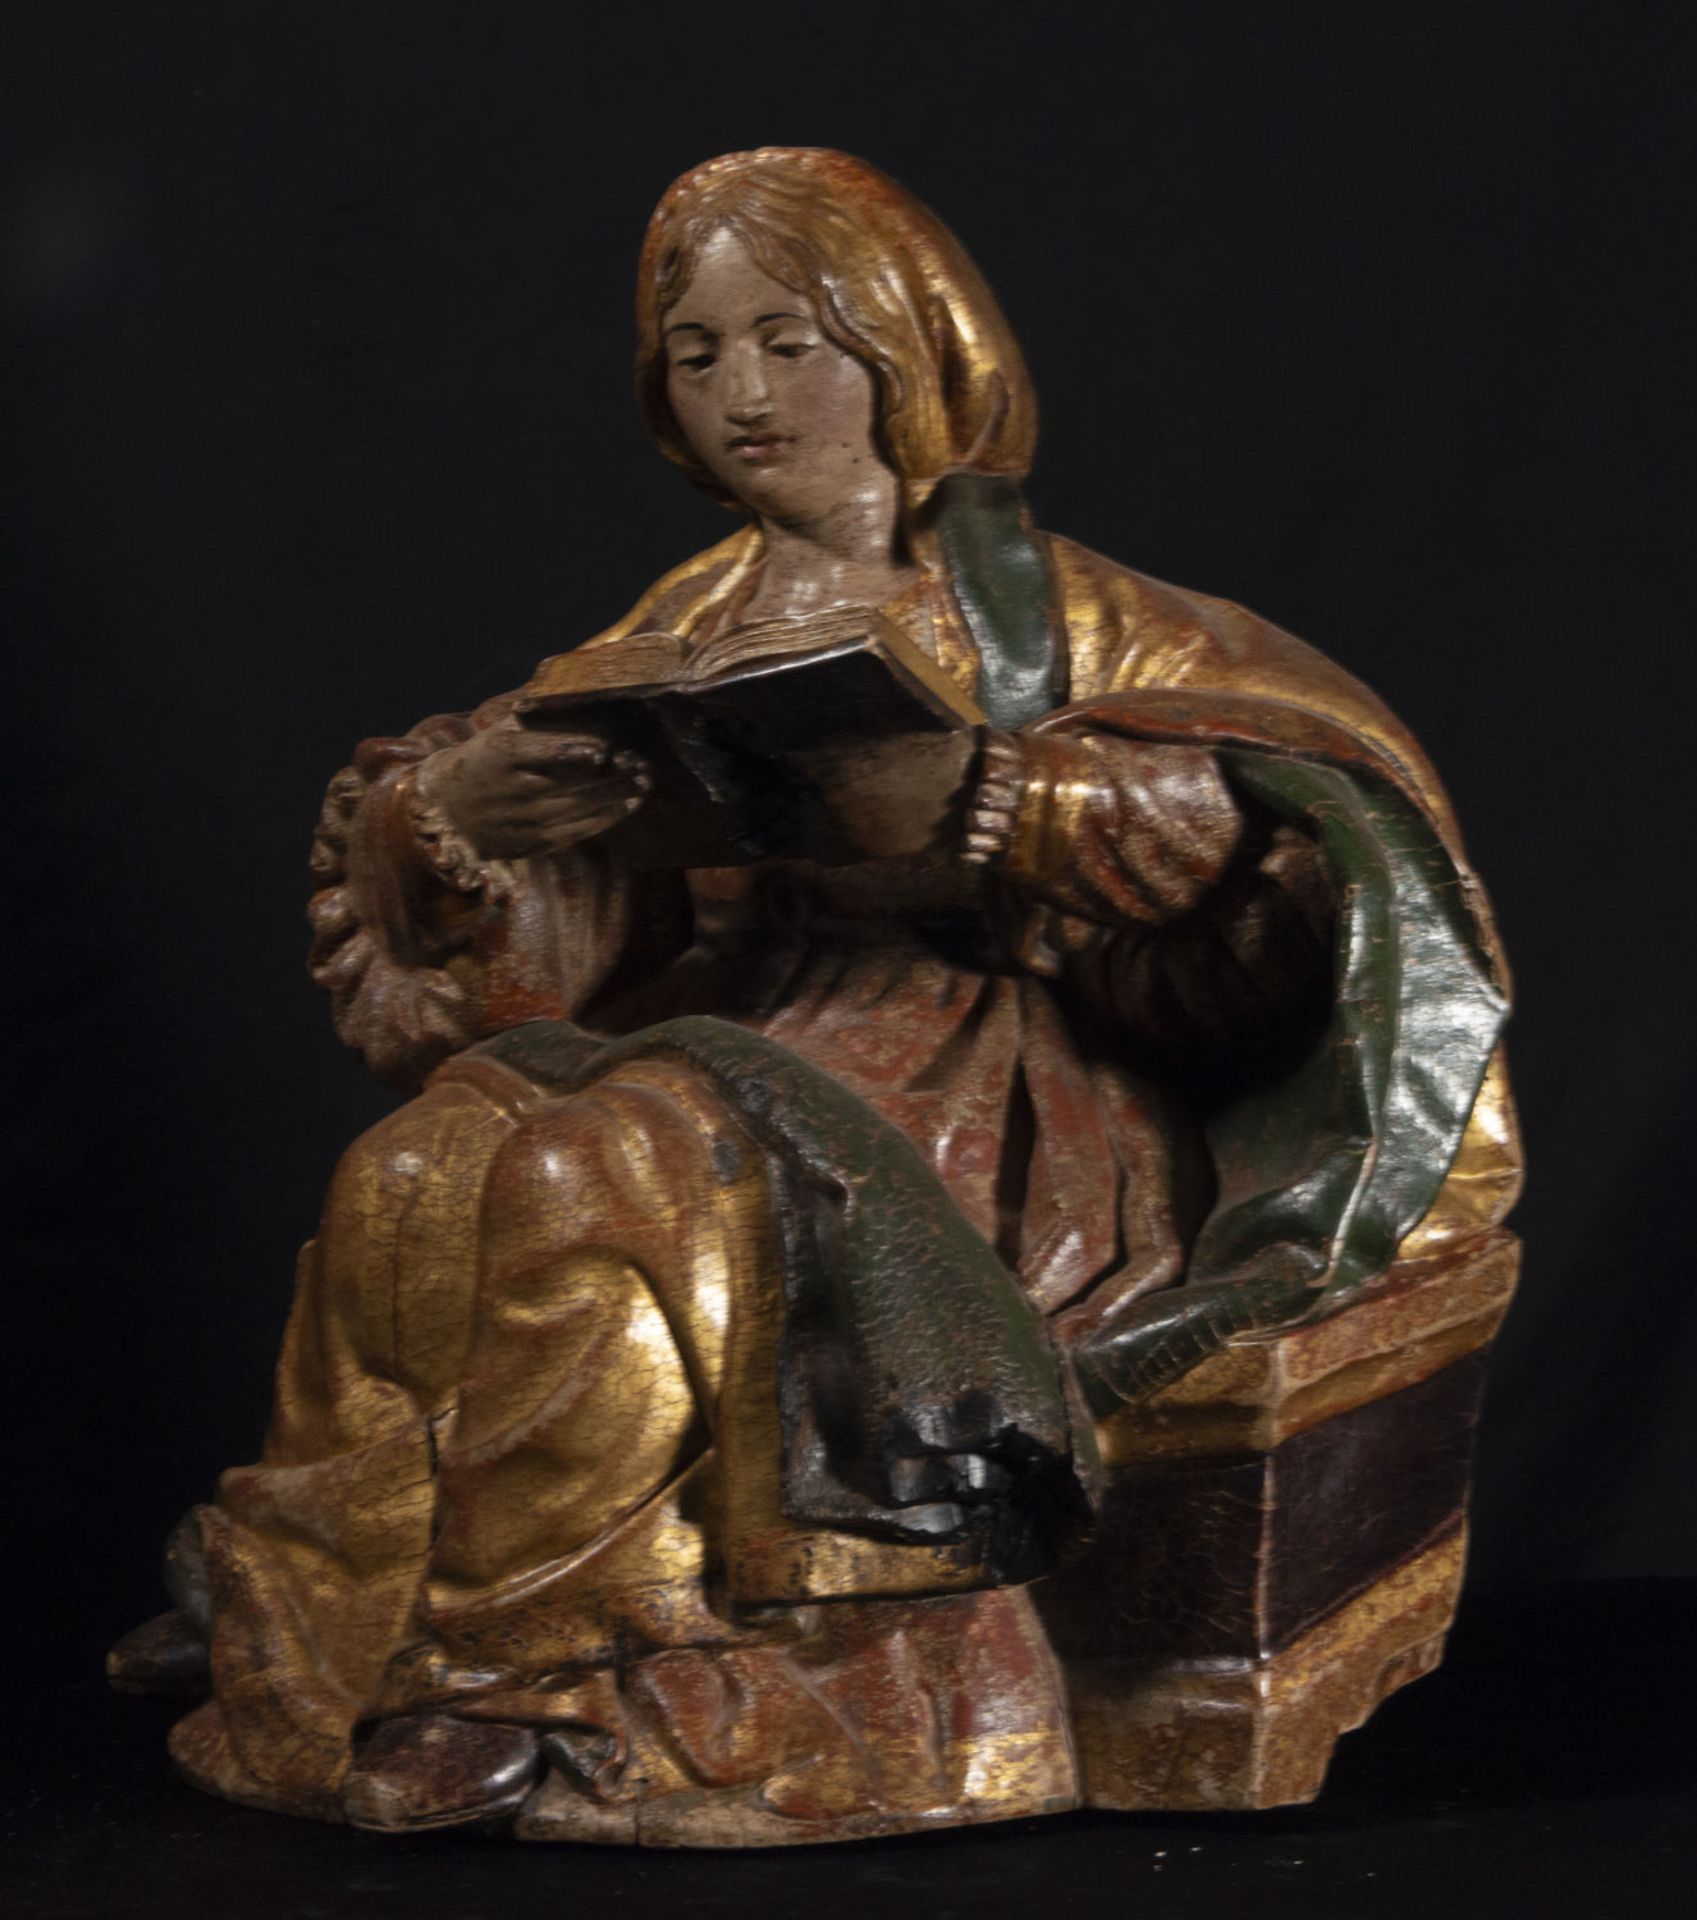 Spectacular lot of Four German Renaissance Carvings from the 16th century, possibly Rhine Valley lat - Image 8 of 47